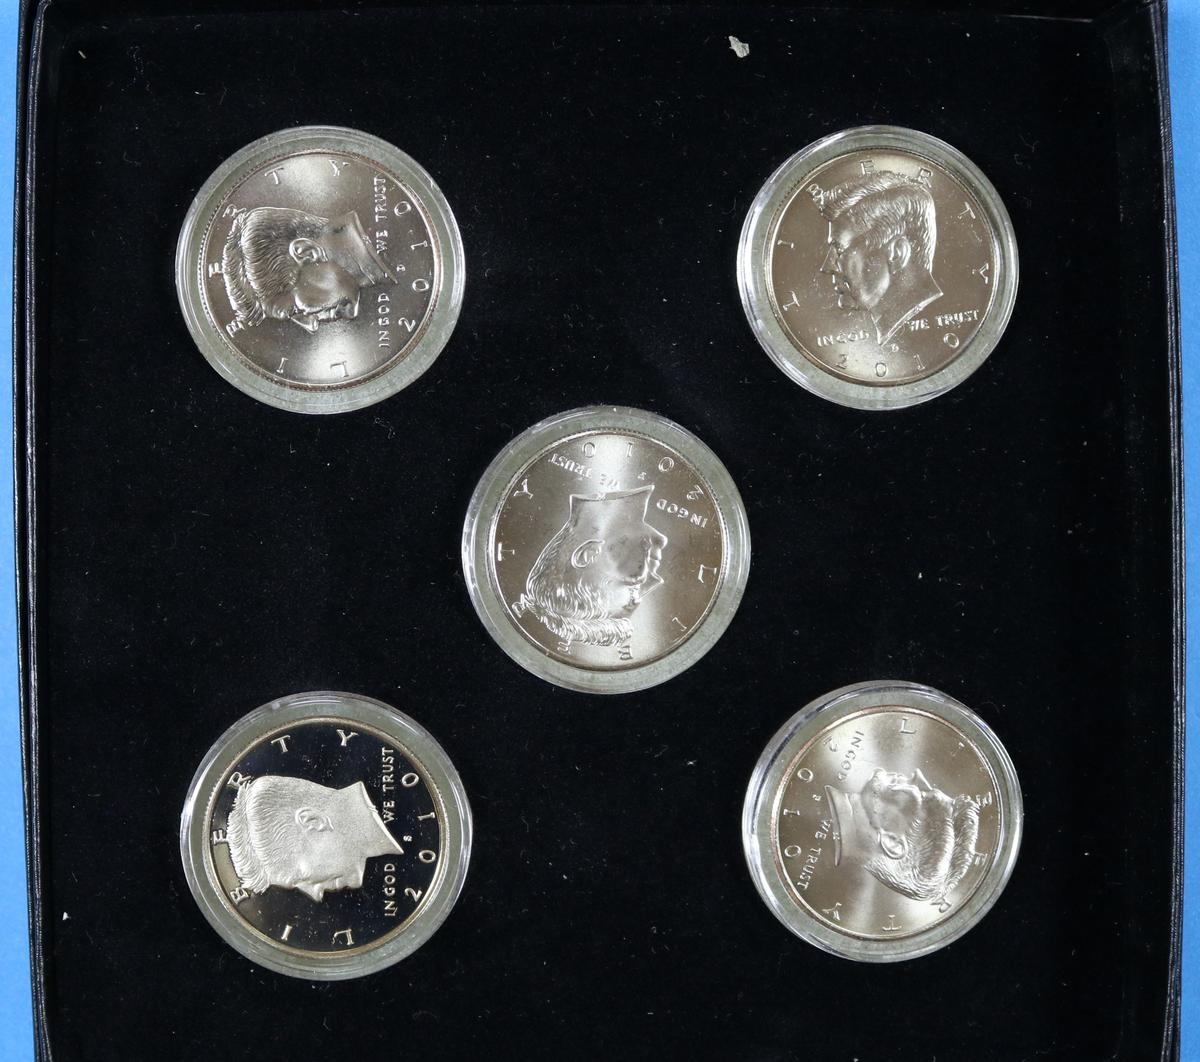 2010 Kennedy Half Dollar P & D Set with S Proof - 5 Coins